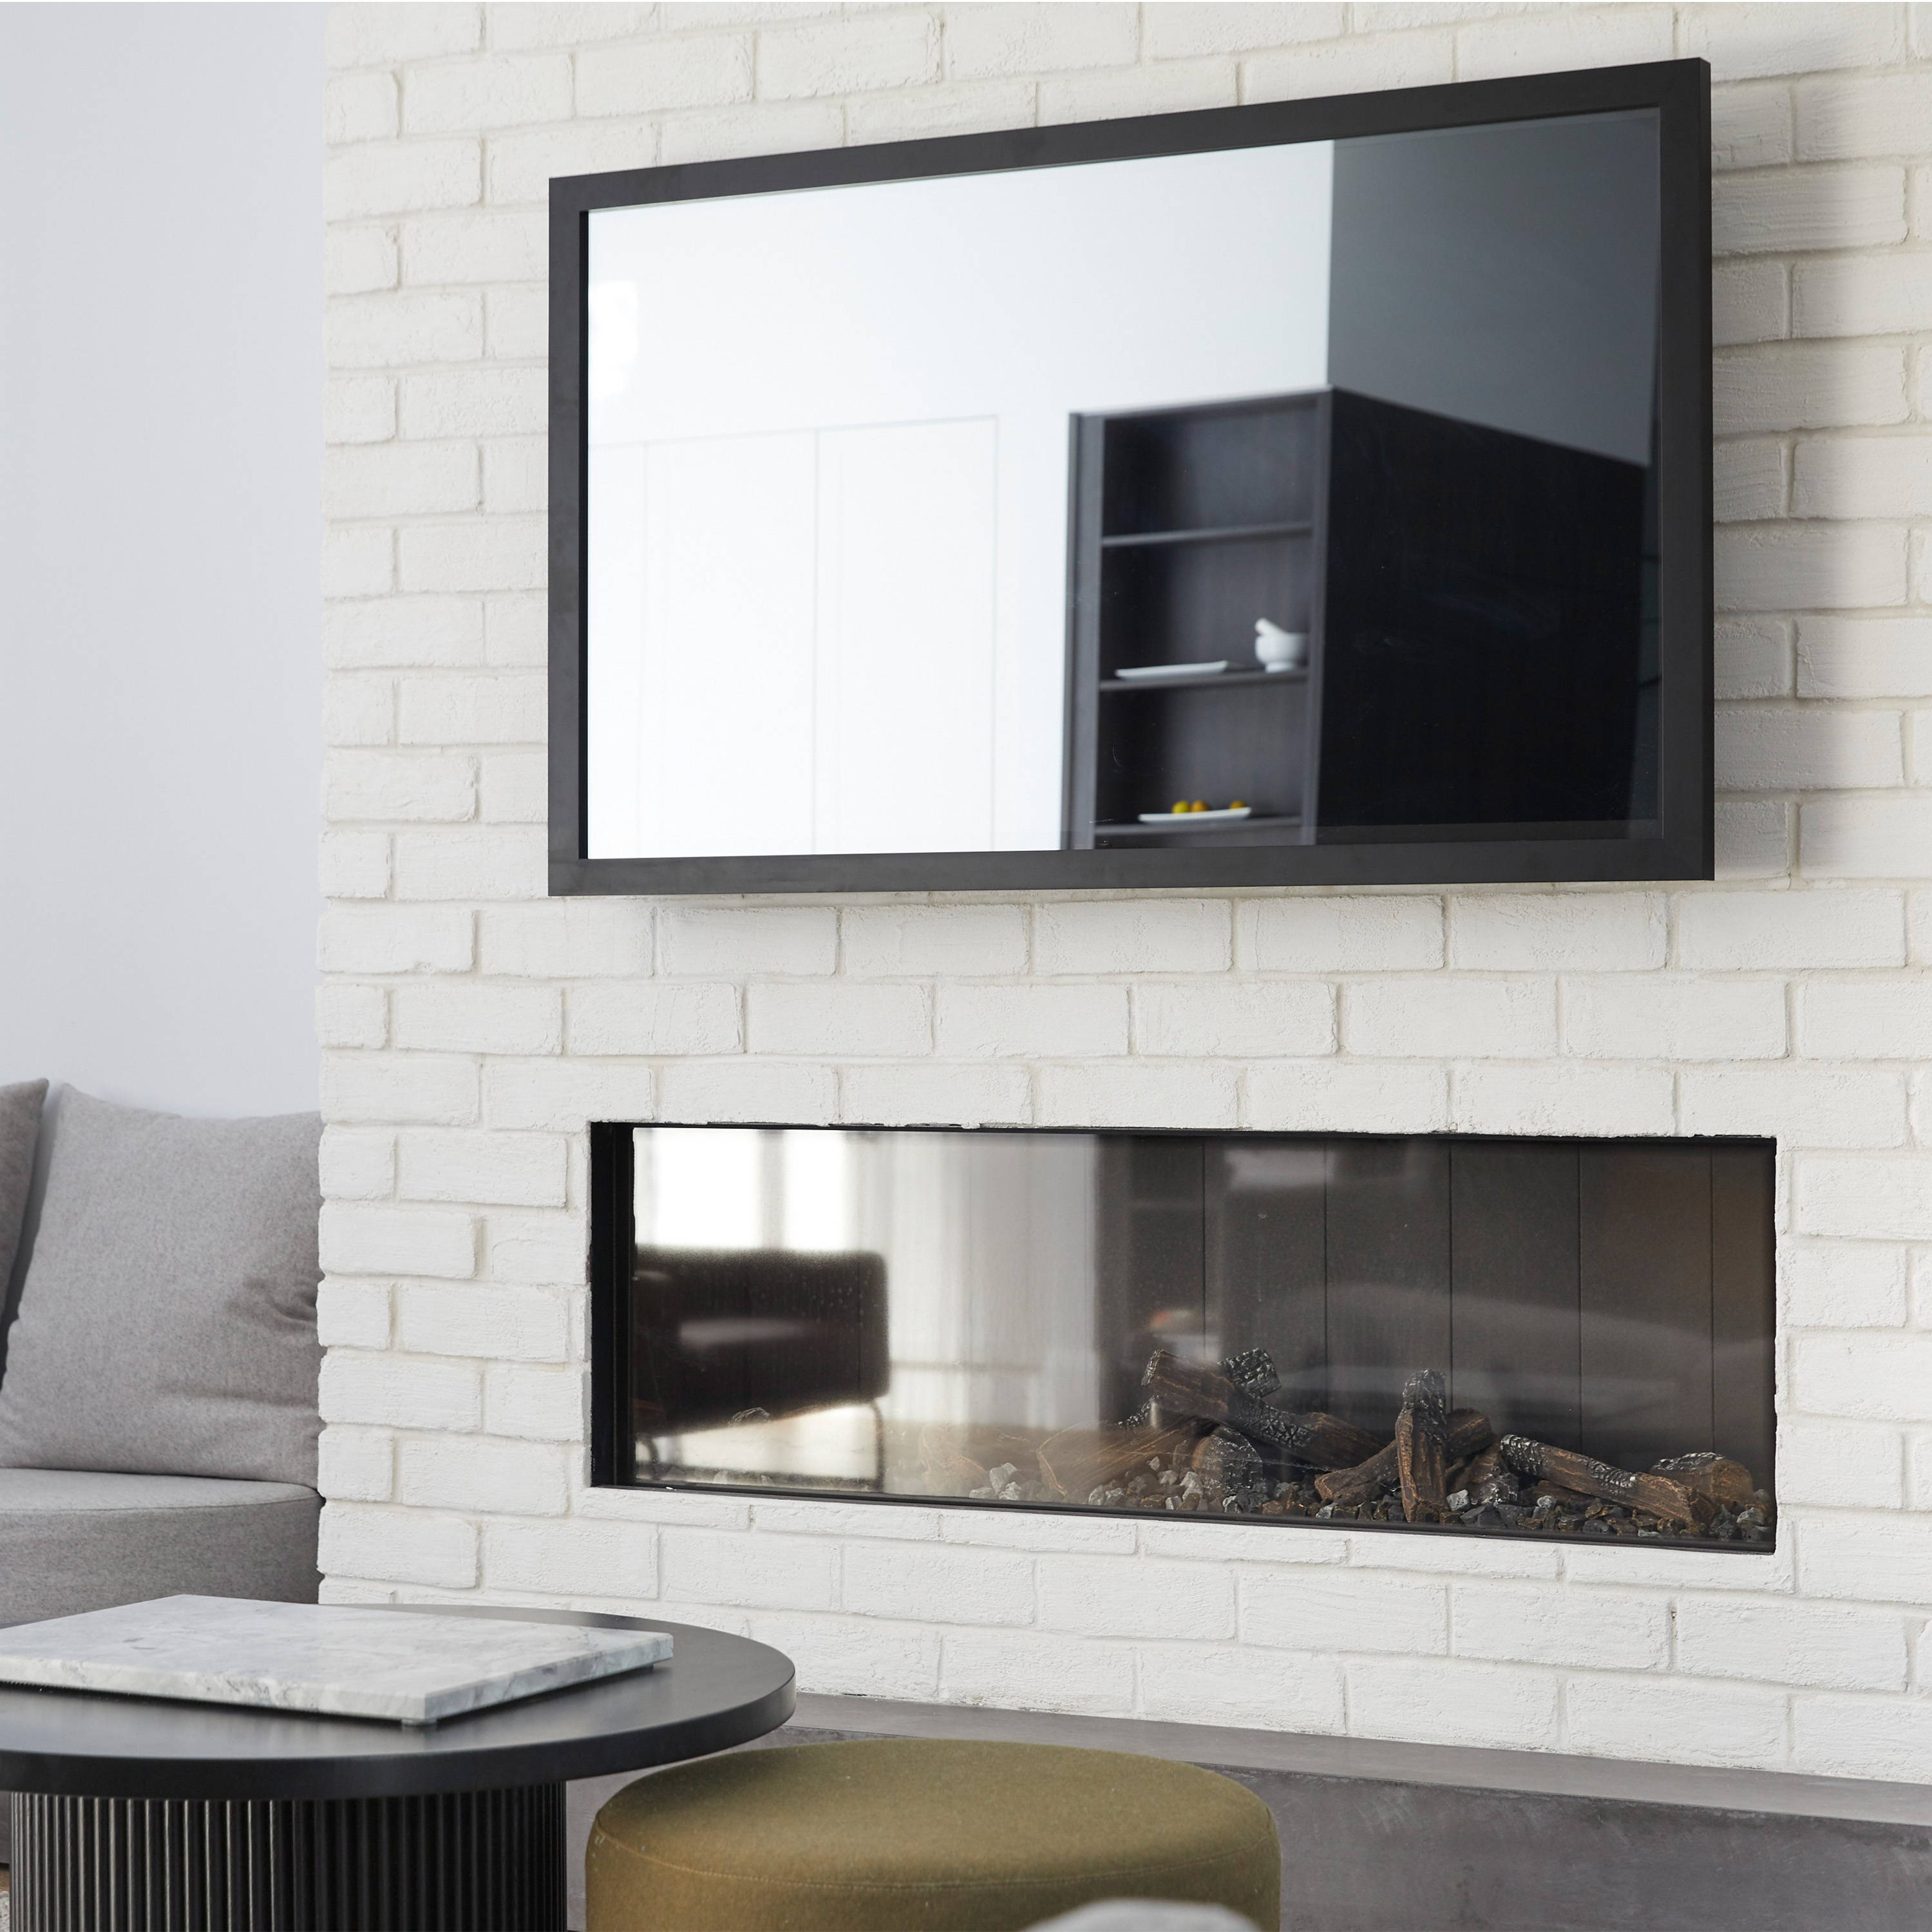 TV-Mirror with Matte Black Frame by FRAMING TO A T. A black framed mirror disguises the TV in this living room space as seen on The Block.